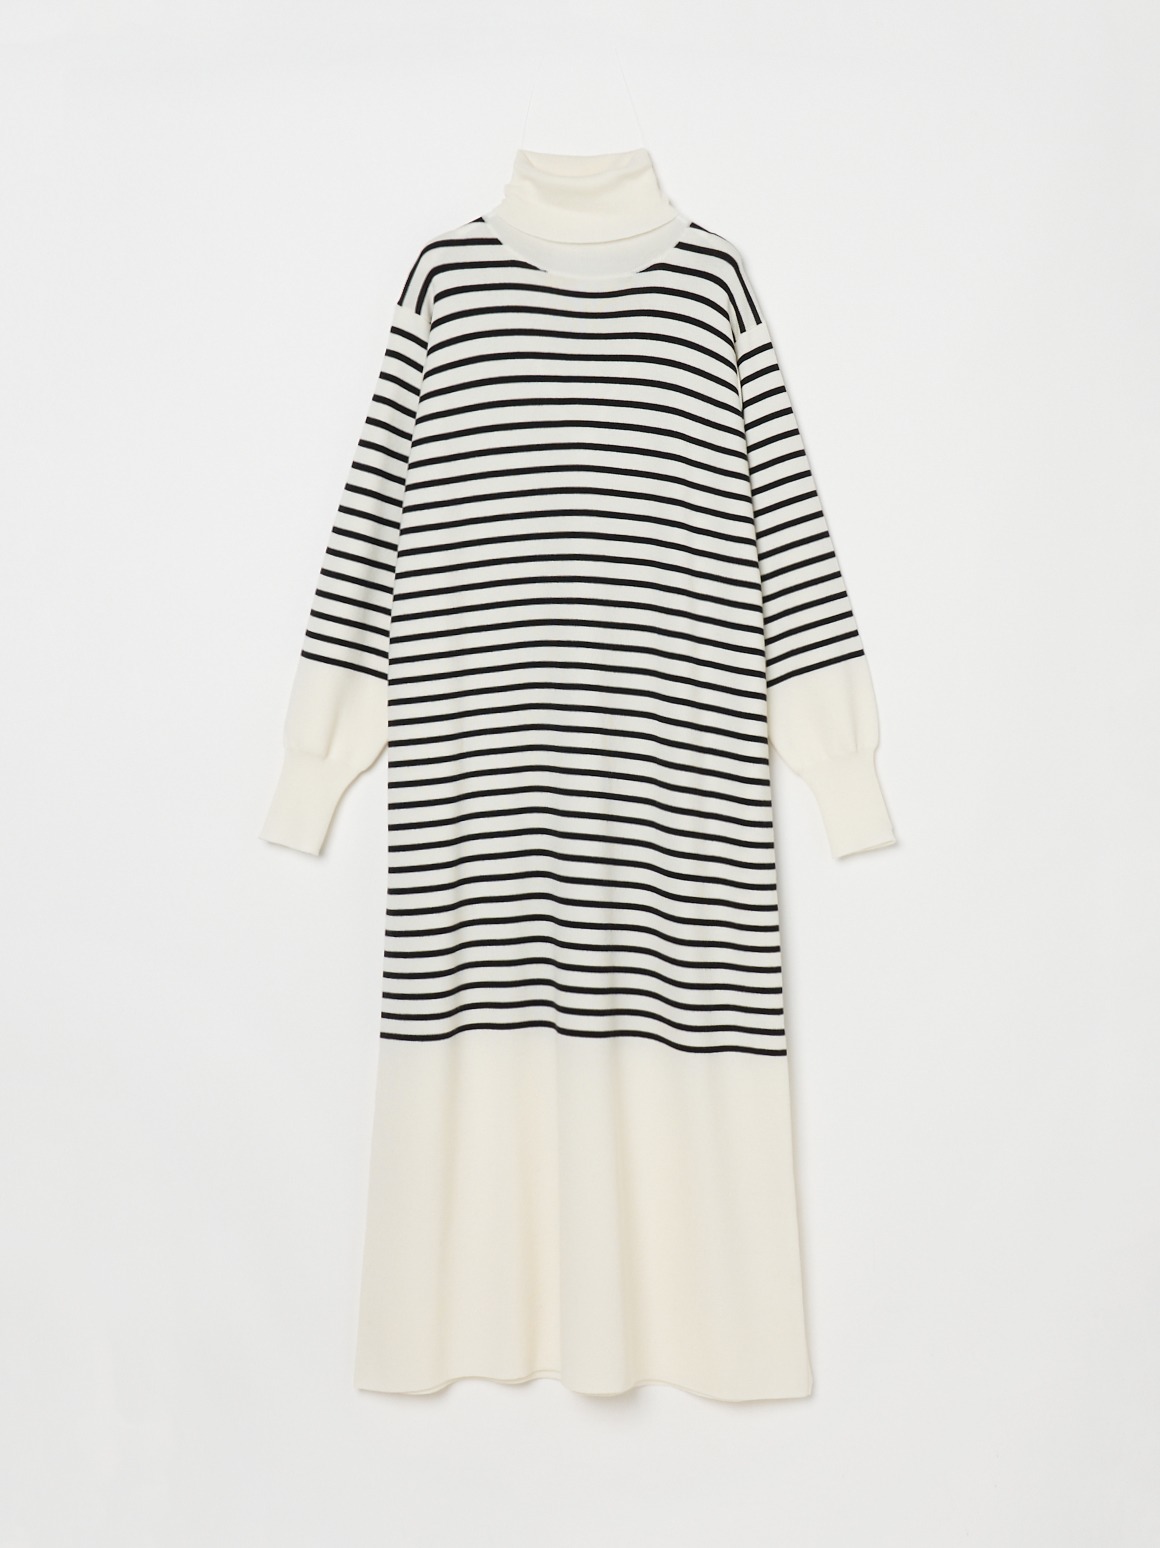 Wool outfit dress 詳細画像 off white/black 2